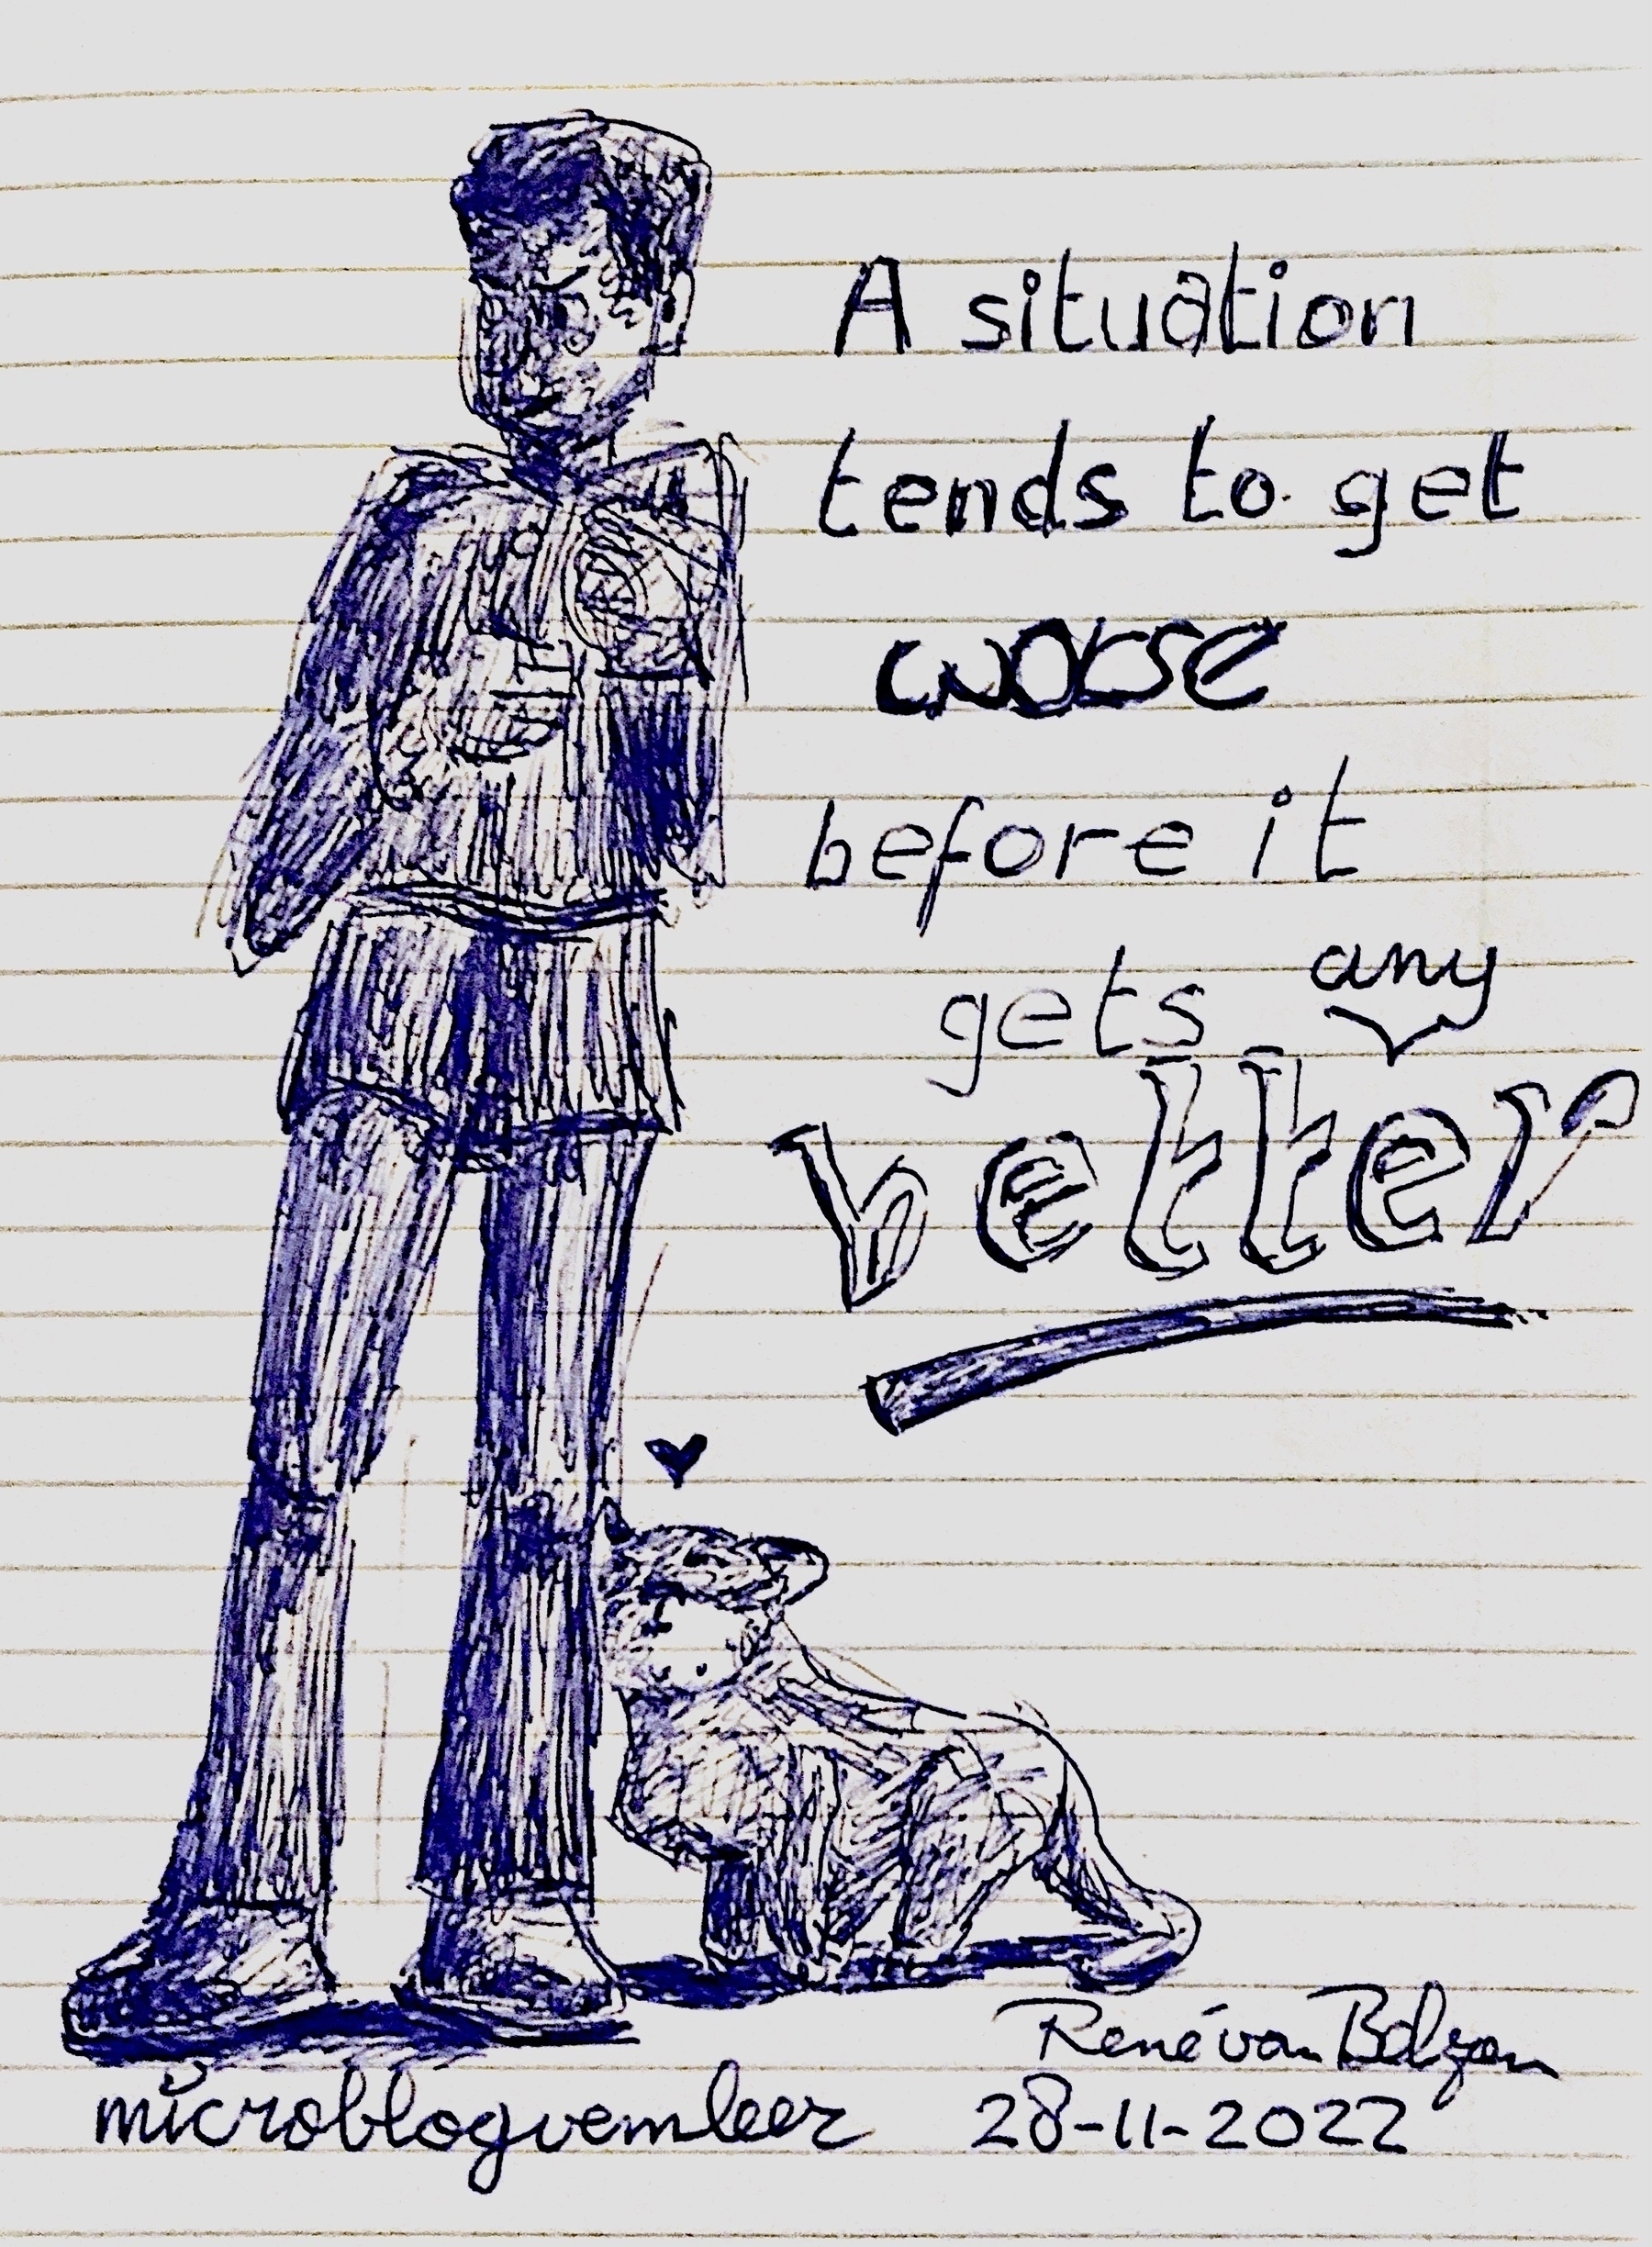 ballpoint pen sketch of man with cat and text A situations tends to get worse before it gets better.